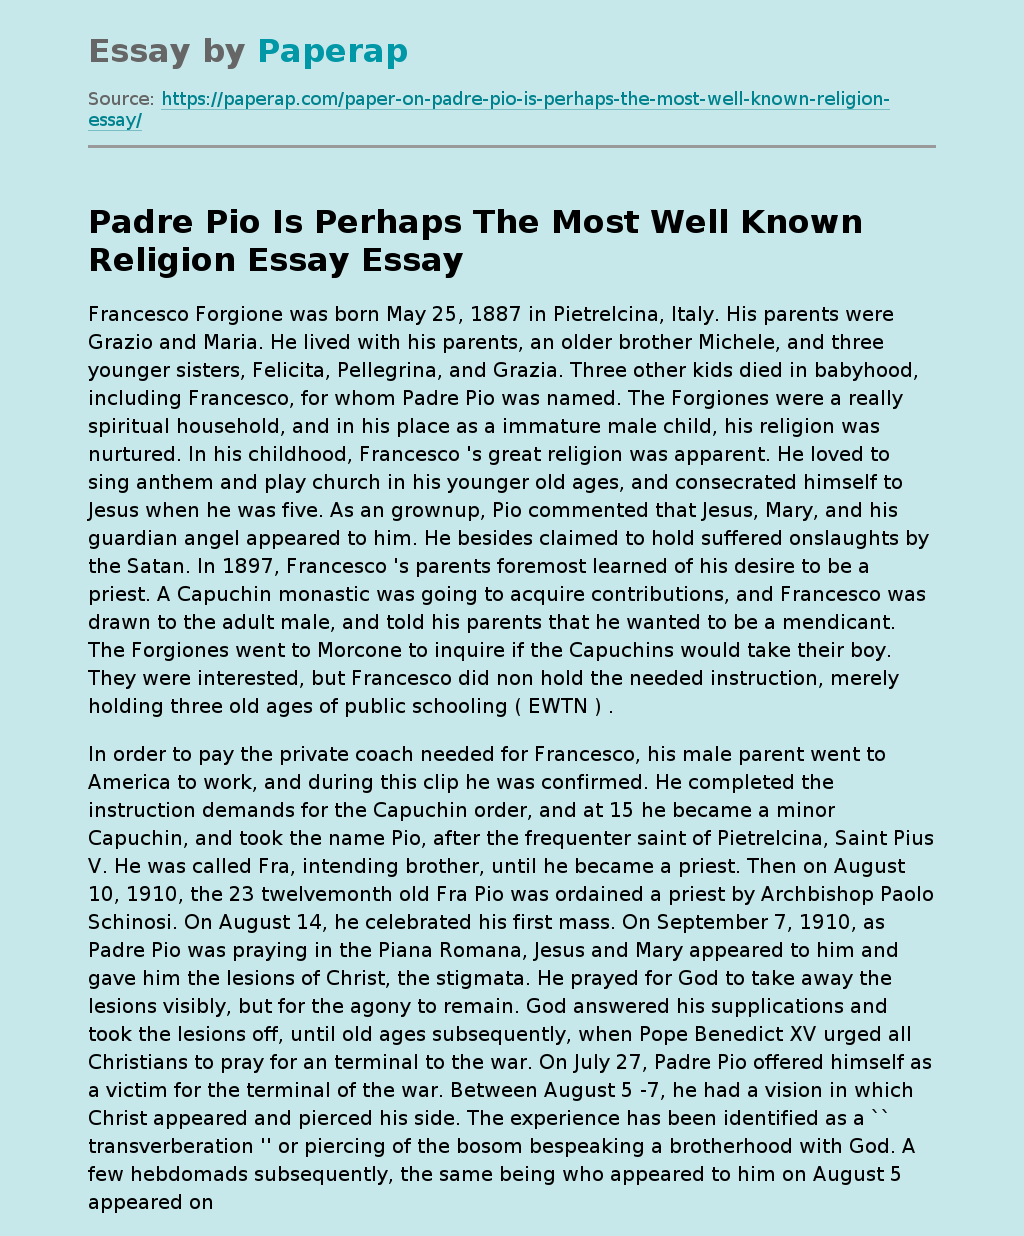 Padre Pio’s Most Famous Essay on Religion